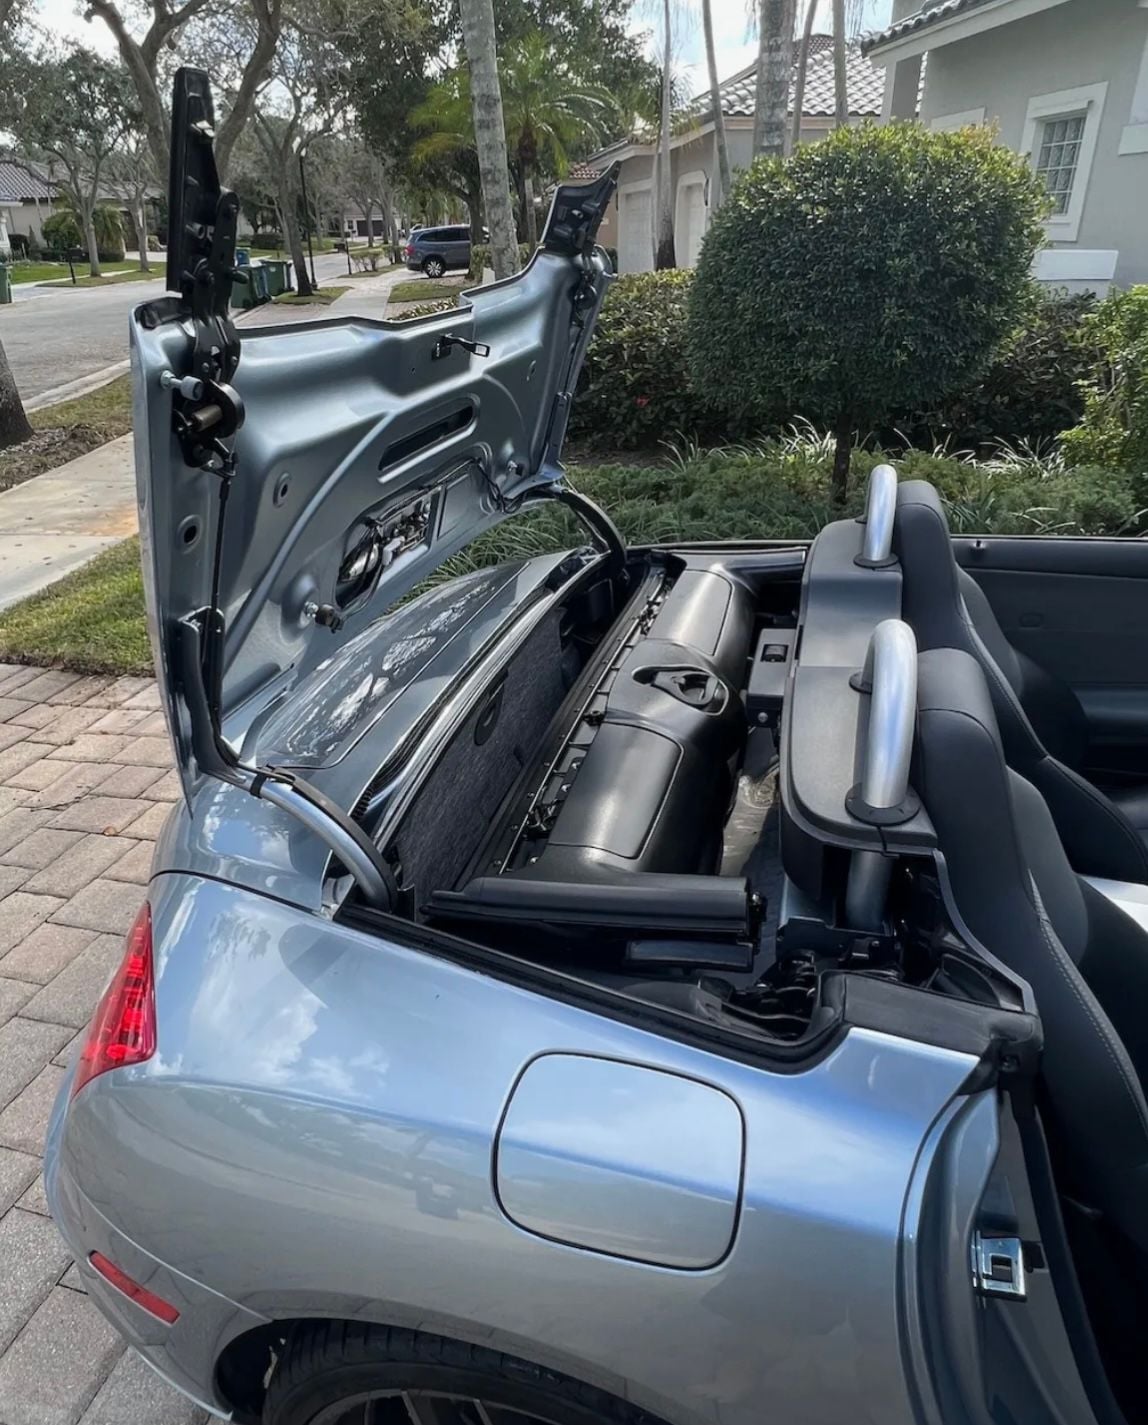 2005 Chrysler Crossfire - 2005 Crossfire Roadster; 10k MILES!!  6-speed manual - Used - VIN VIN 1C3AN65L65X03 - 6 cyl - 2WD - Manual - Convertible - Blue - Bonita Springs, FL 34135, United States